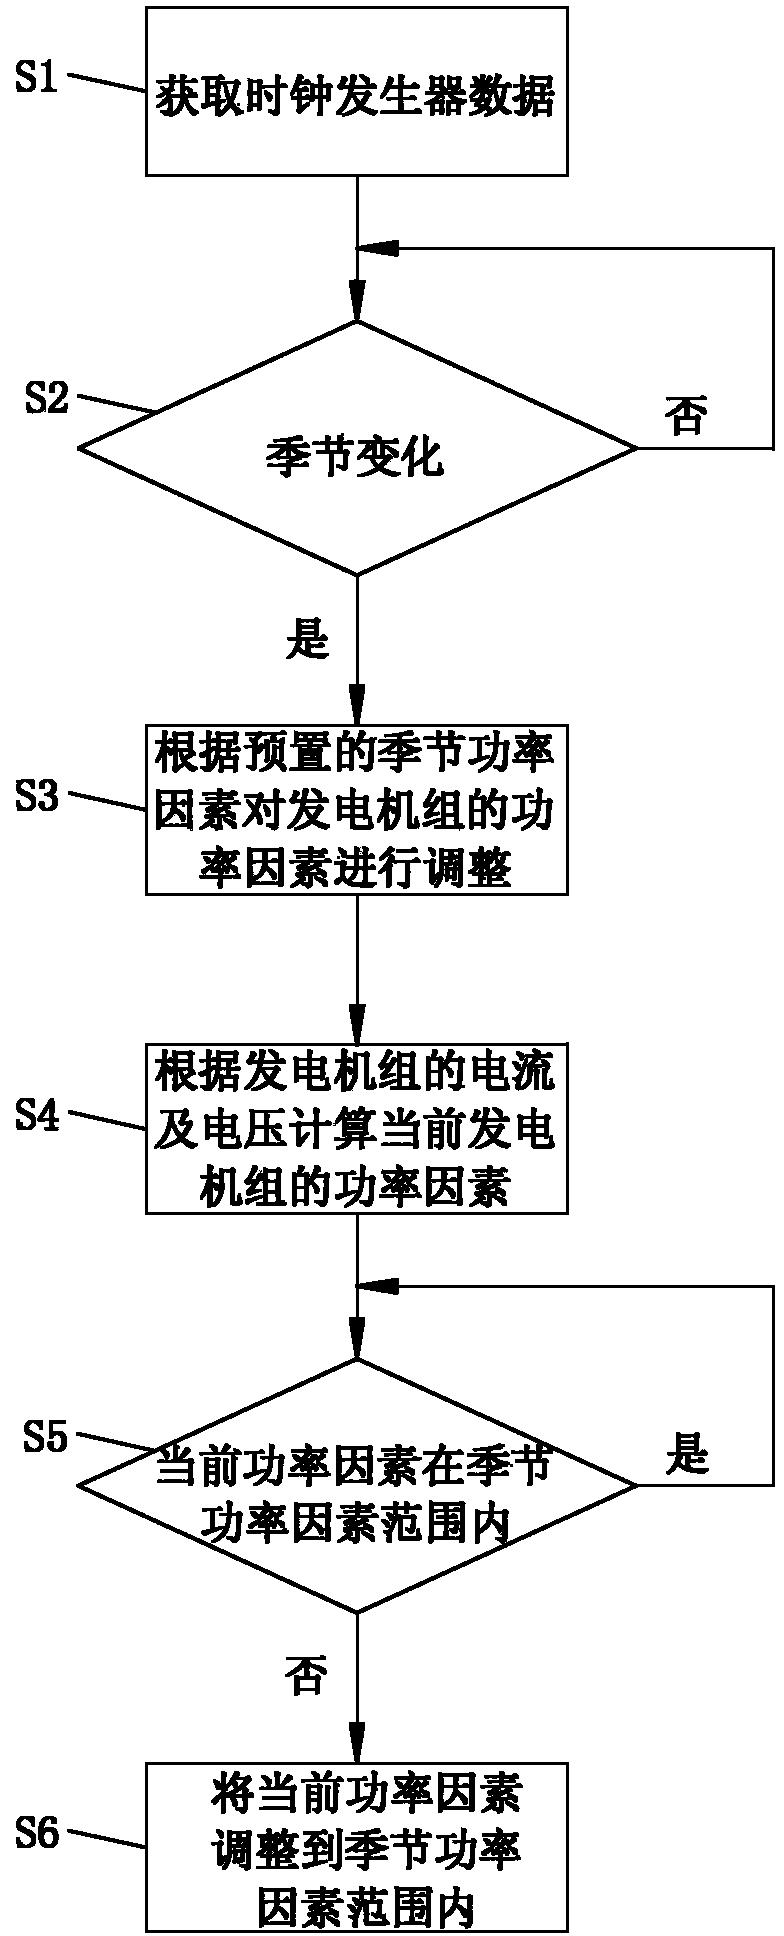 Seasonal adjusting controlling system and method for power factors of hydroelectric generators